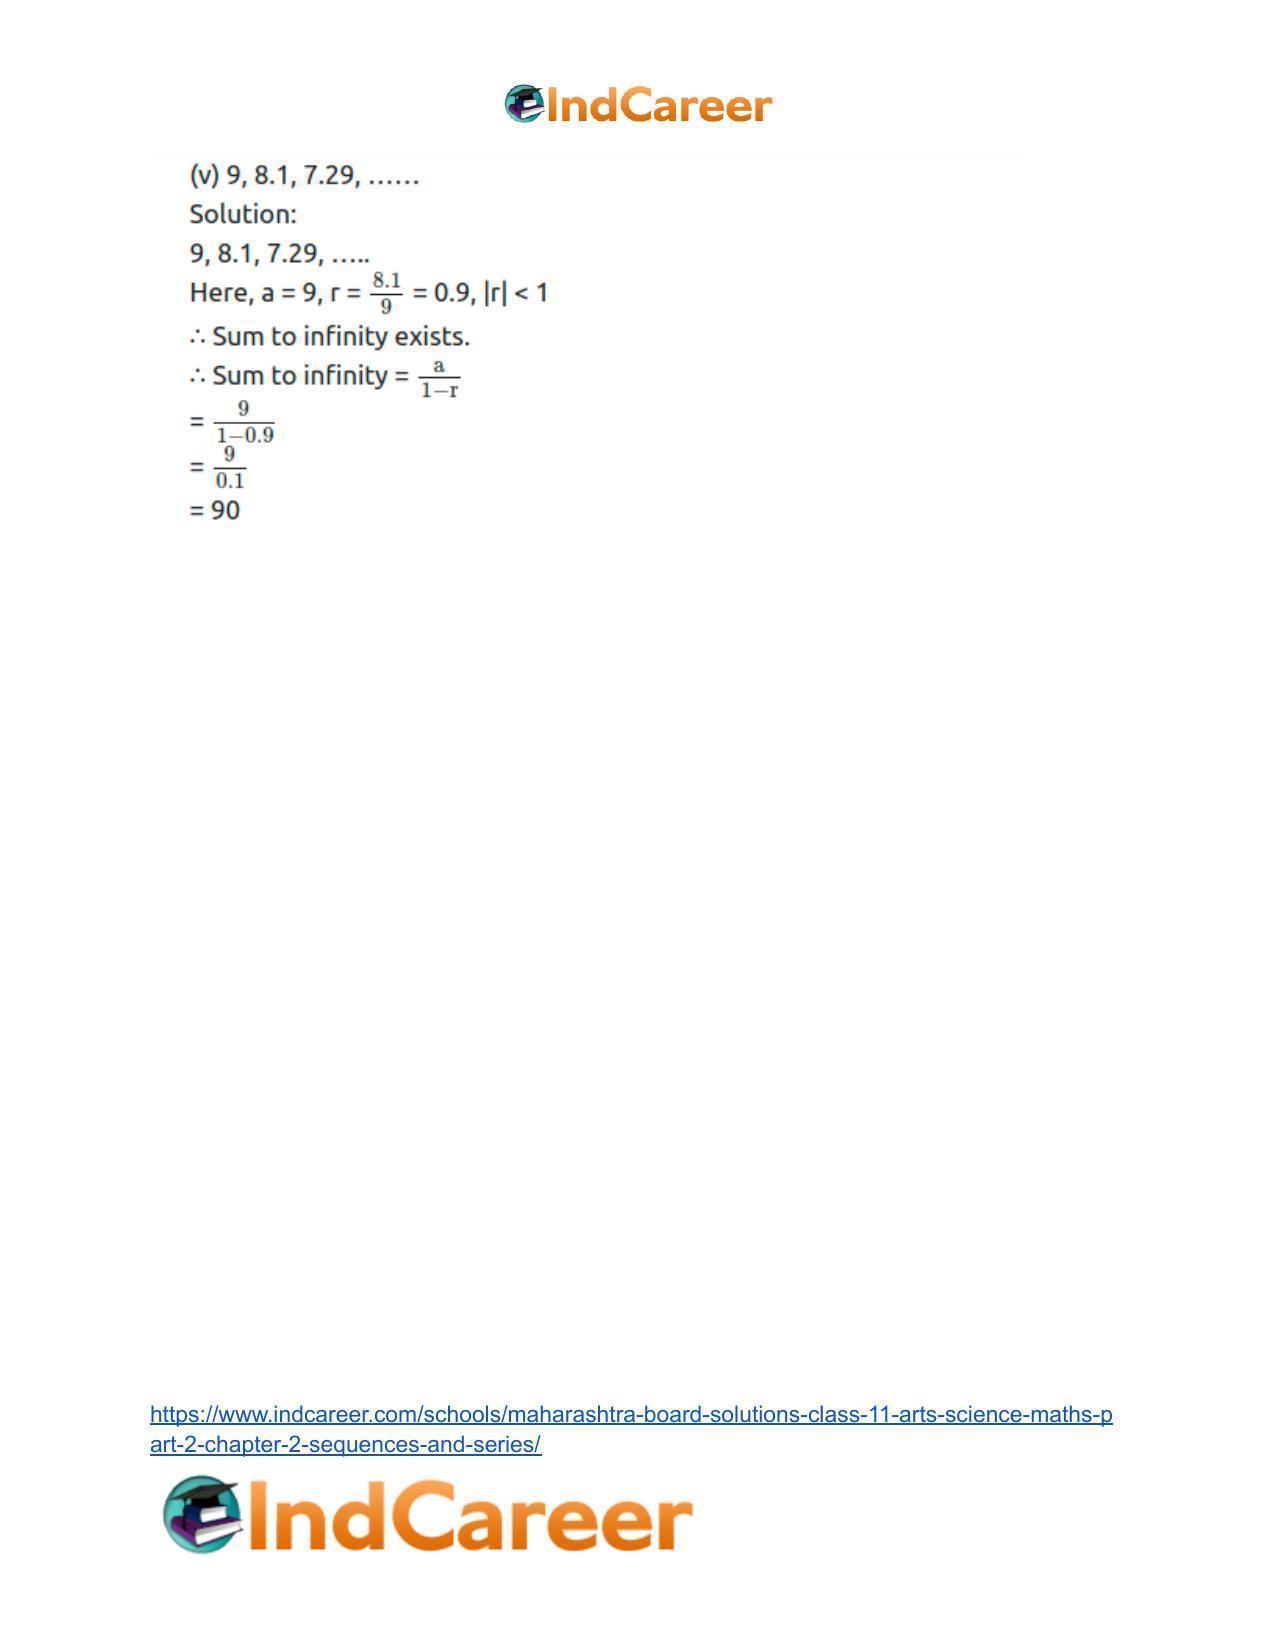 Maharashtra Board Solutions Class 11-Arts & Science Maths (Part 2): Chapter 2- Sequences and Series - Page 40